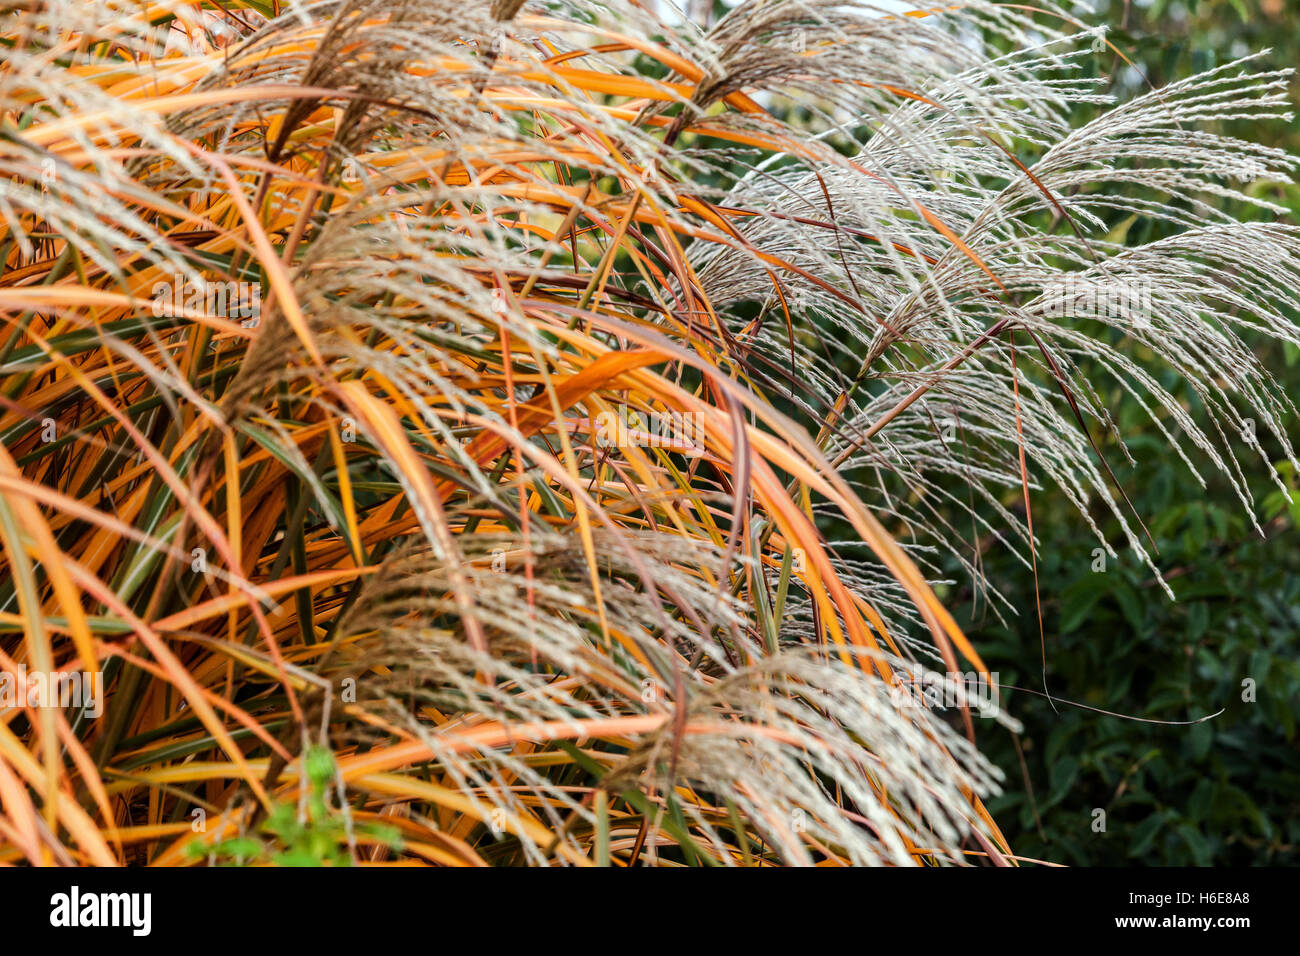 Miscanthus sinensis 'Positano' Chinois argent herbe automne herbe ornementale Banque D'Images